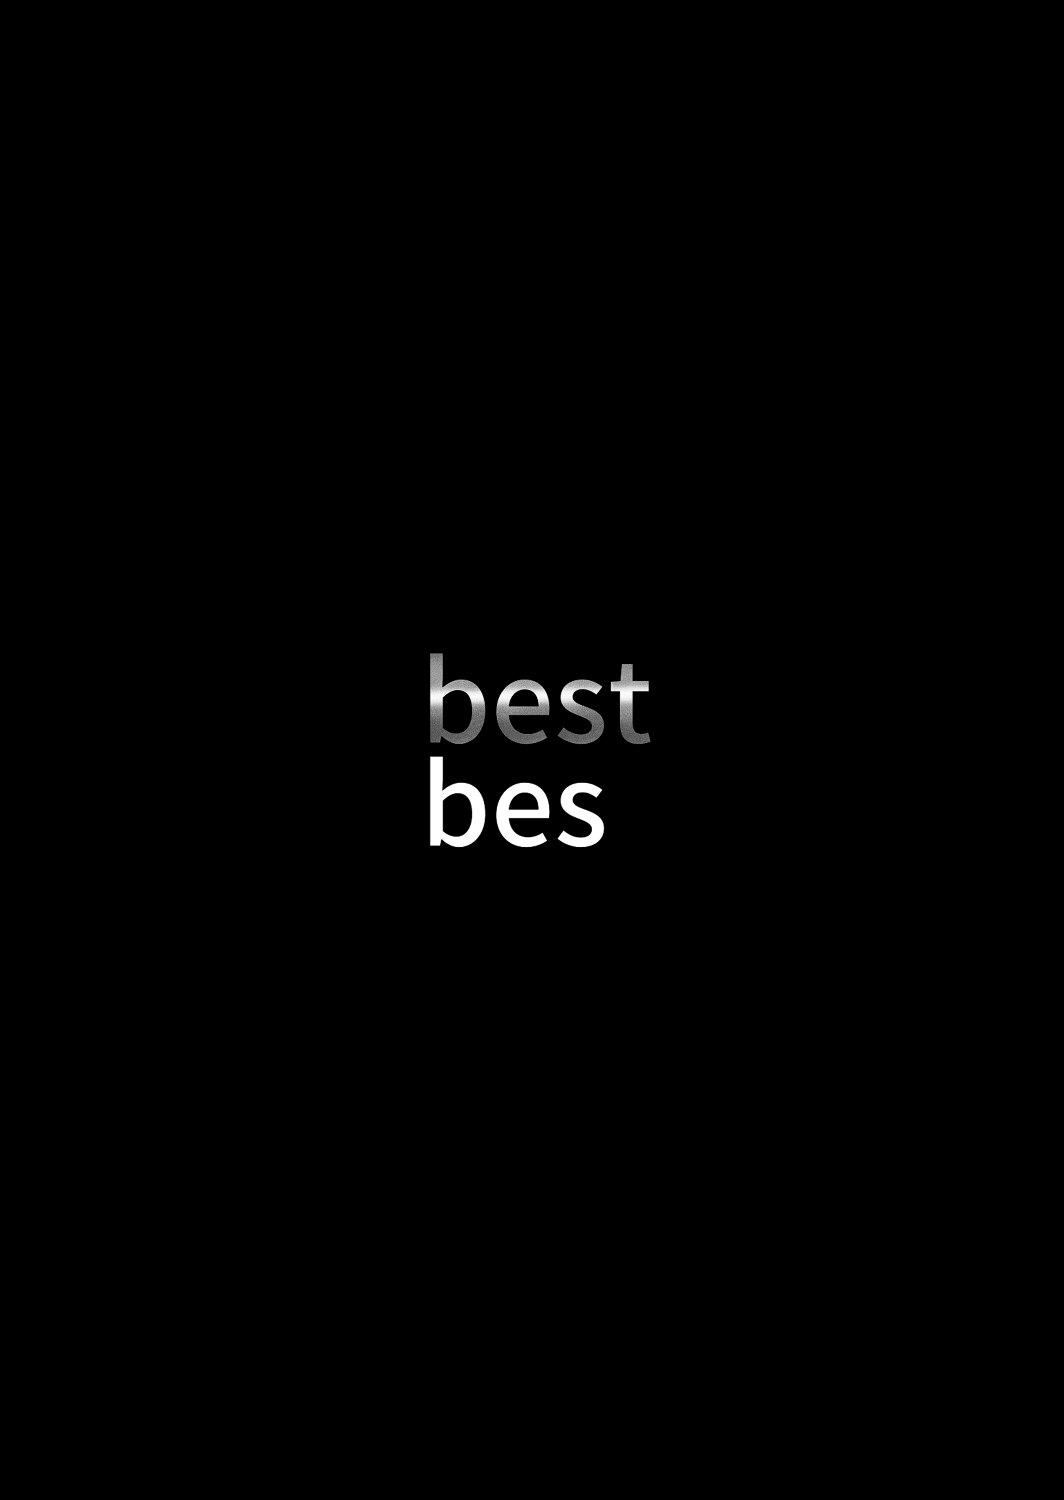 [Best Bes] バ〇オハ〇ード -後日談- (ongoing)